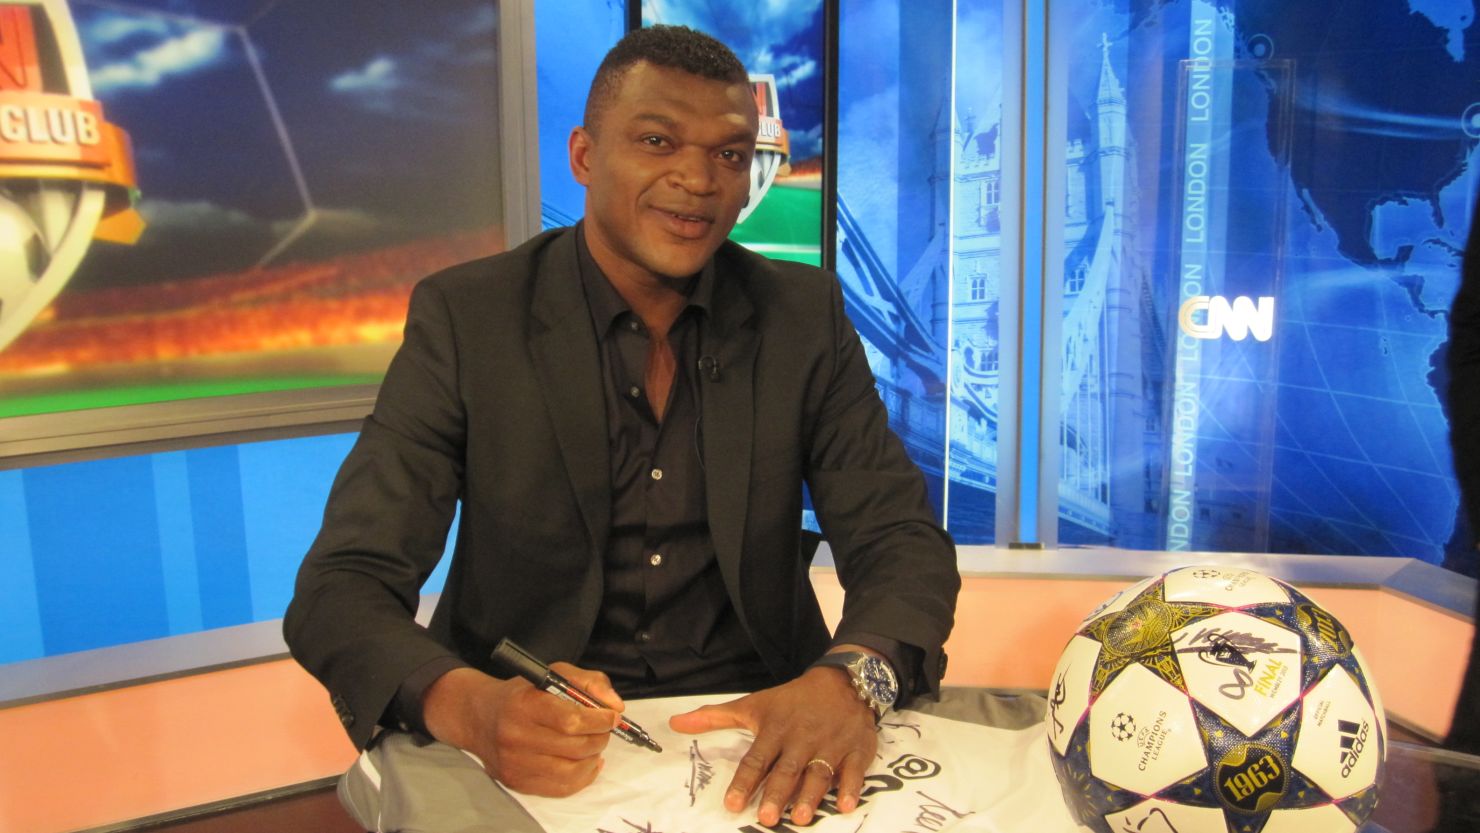 France World Cup star Marcel Desailly signs our special shirt and Champions League ball.